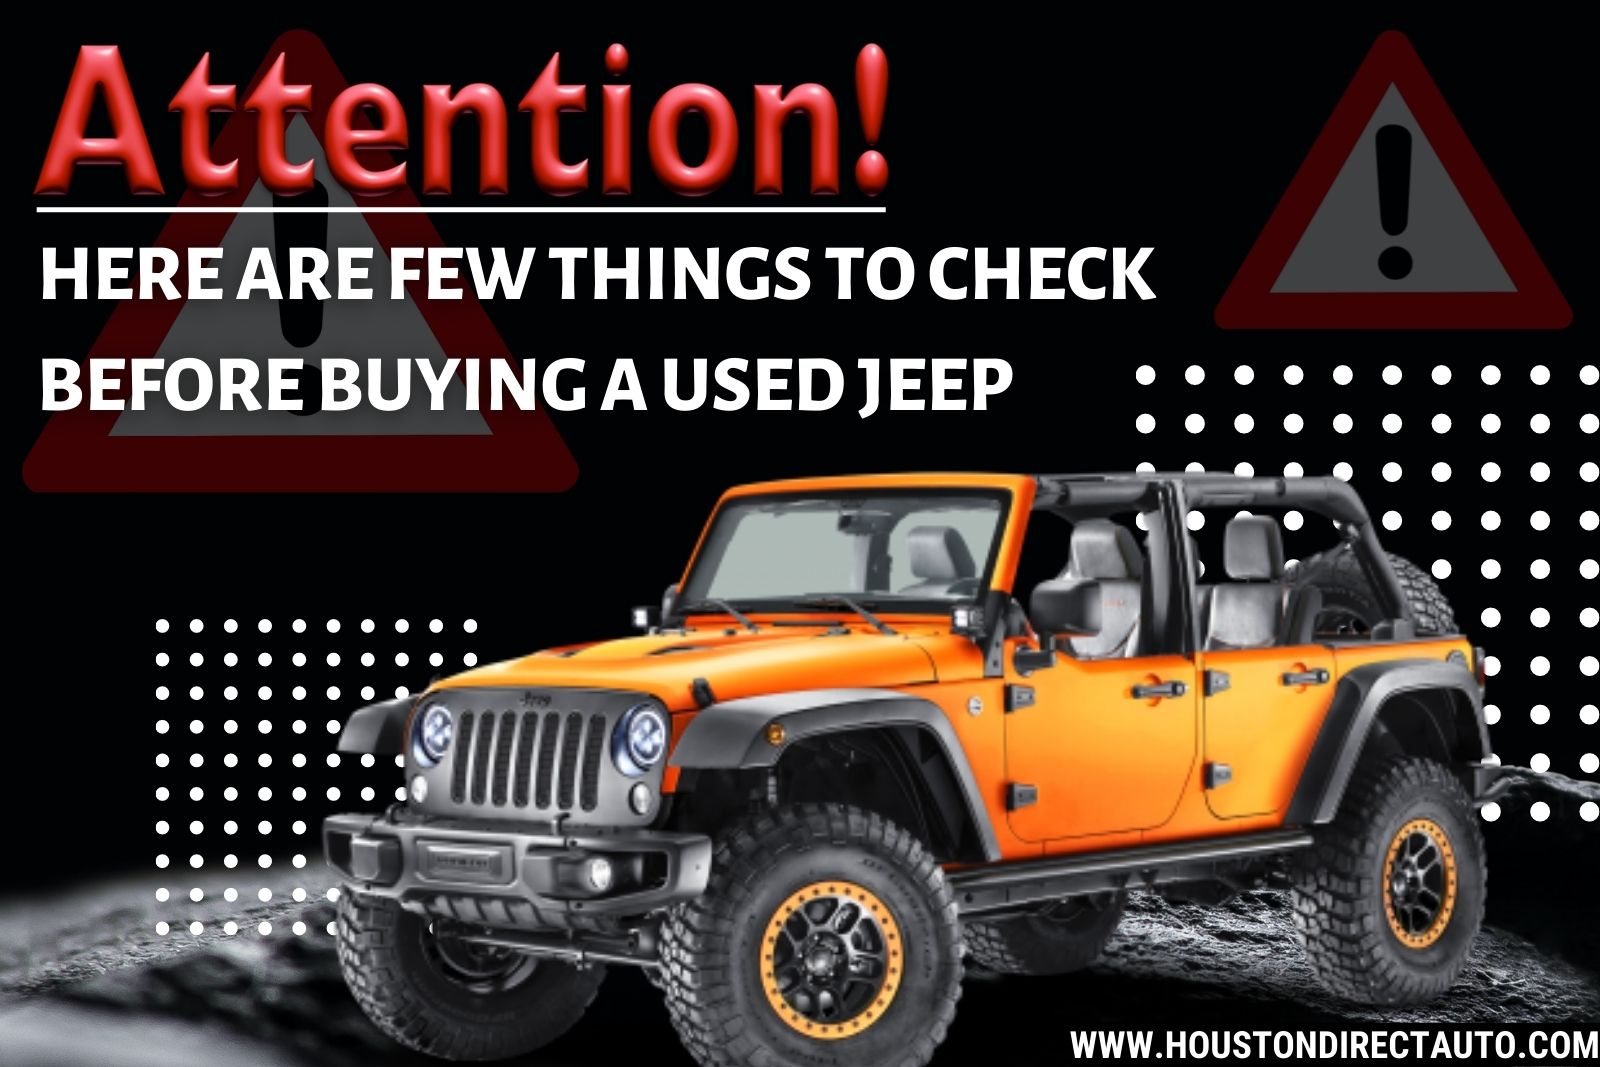 Pre Owned Jeeps For Sale In Houston TX, Used Jeeps For Sale In Houston TX, Houston Used Vehicles, Cheap Cars In Houston Texas